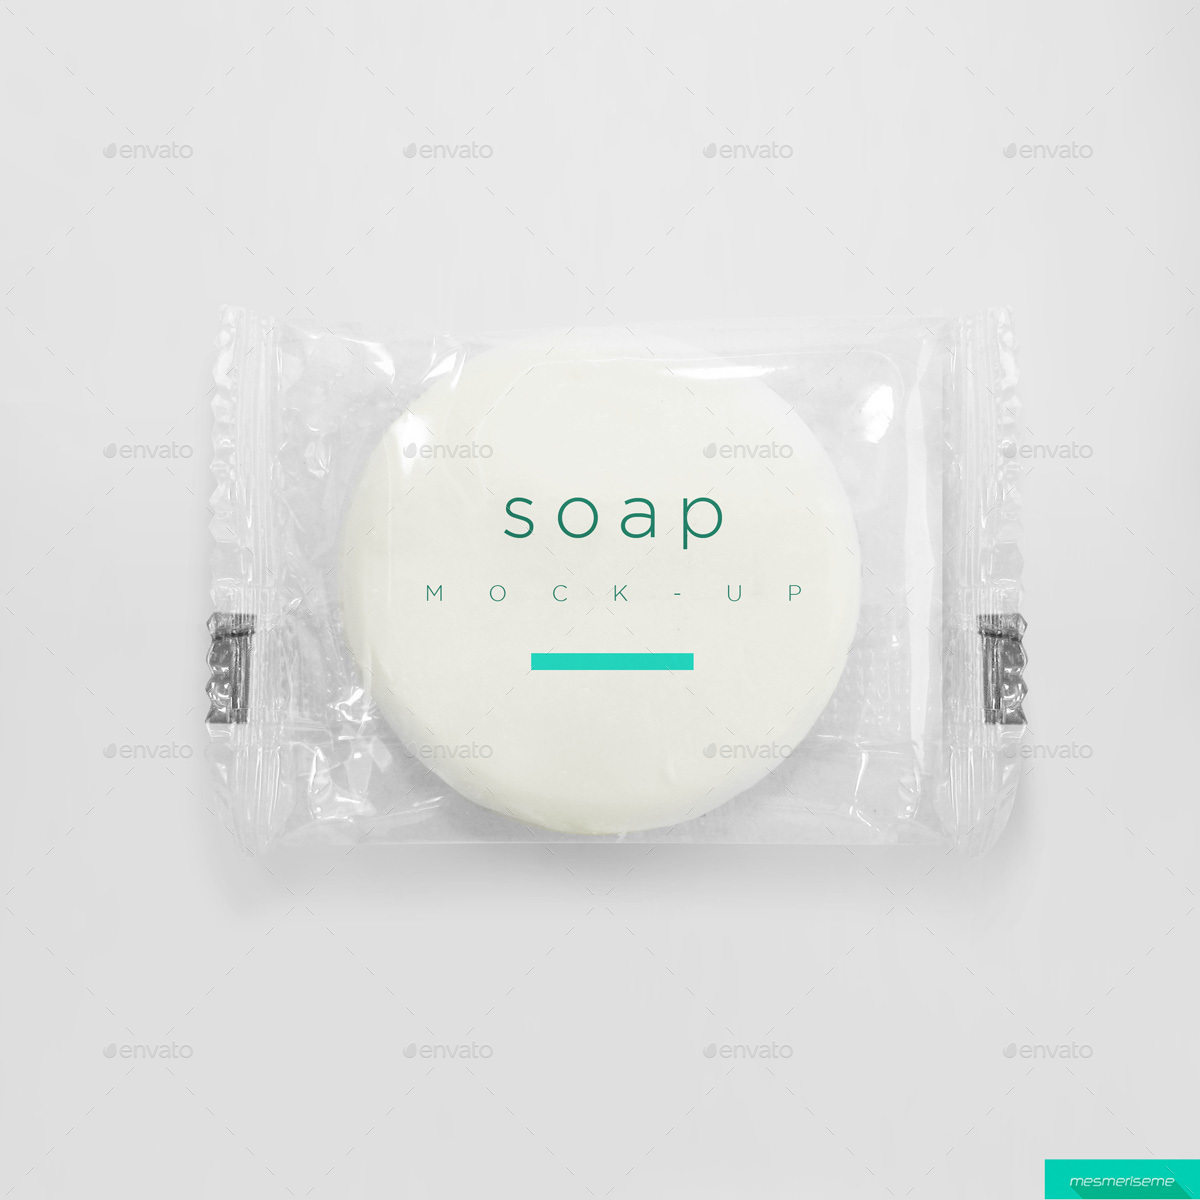 Download Hotel Soap Mock-up by mesmeriseme_pro | GraphicRiver